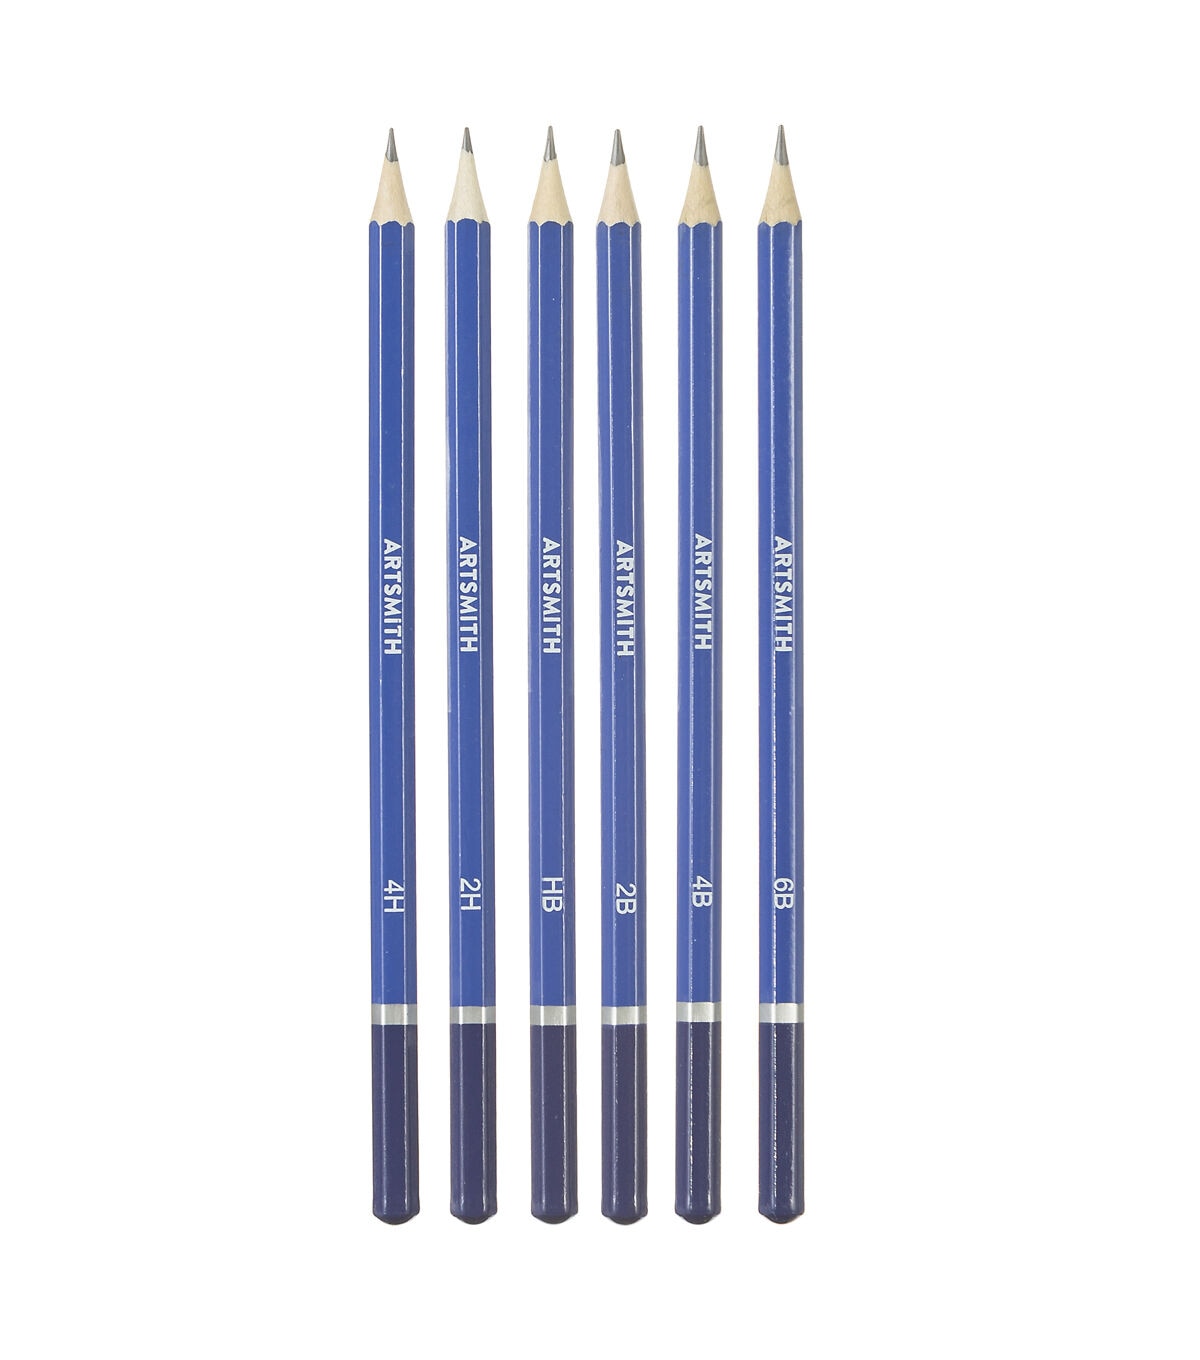 6ct Sketching Pencils by Artsmith